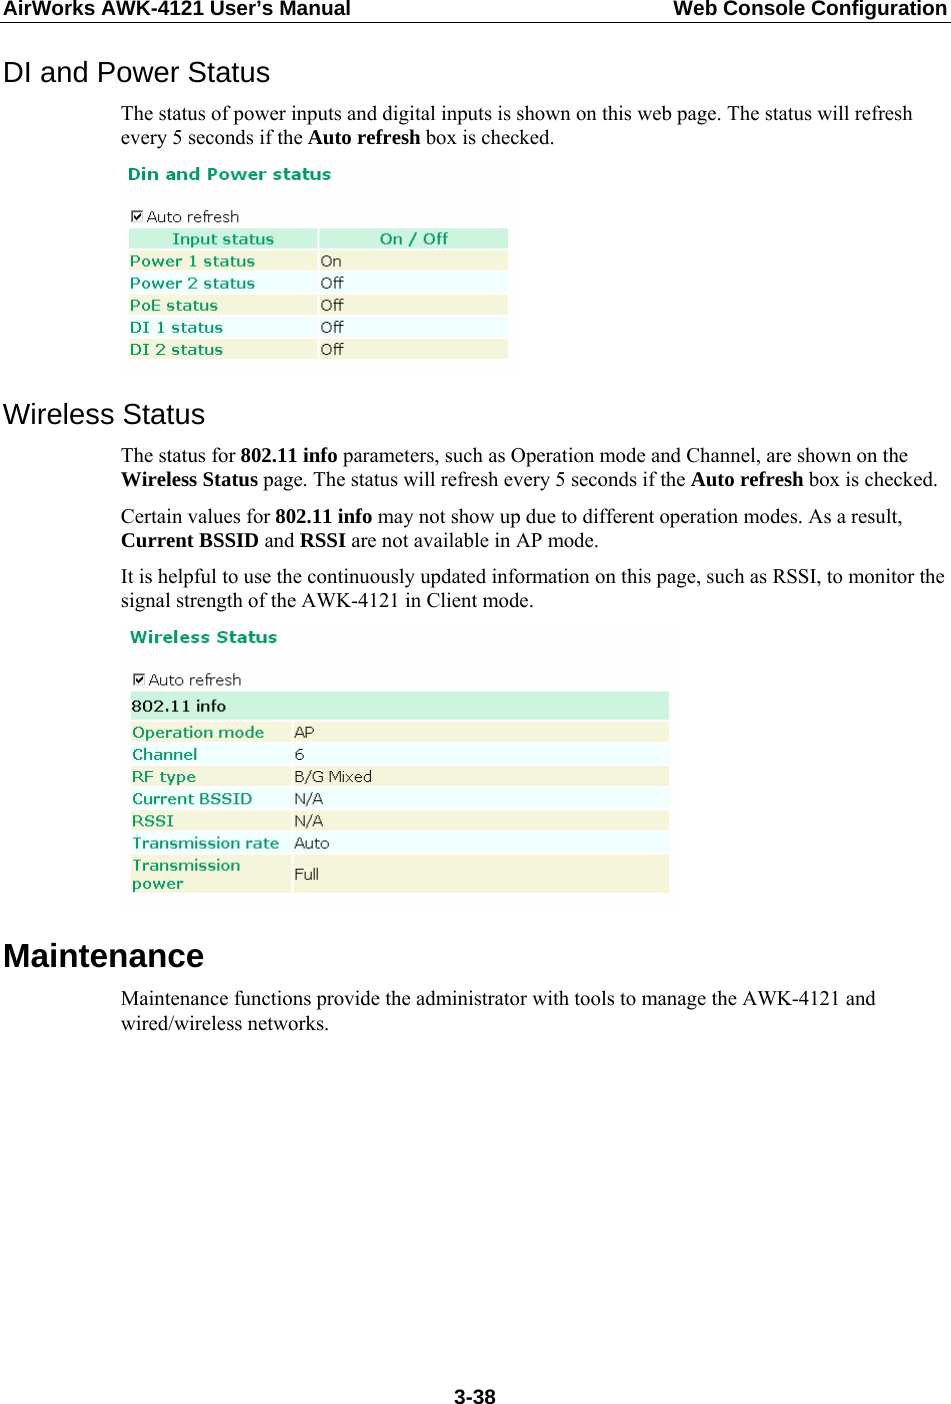 AirWorks AWK-4121 User’s Manual  Web Console Configuration DI and Power Status The status of power inputs and digital inputs is shown on this web page. The status will refresh every 5 seconds if the Auto refresh box is checked.    Wireless Status The status for 802.11 info parameters, such as Operation mode and Channel, are shown on the Wireless Status page. The status will refresh every 5 seconds if the Auto refresh box is checked.   Certain values for 802.11 info may not show up due to different operation modes. As a result, Current BSSID and RSSI are not available in AP mode. It is helpful to use the continuously updated information on this page, such as RSSI, to monitor the signal strength of the AWK-4121 in Client mode.  Maintenance Maintenance functions provide the administrator with tools to manage the AWK-4121 and wired/wireless networks.          3-38